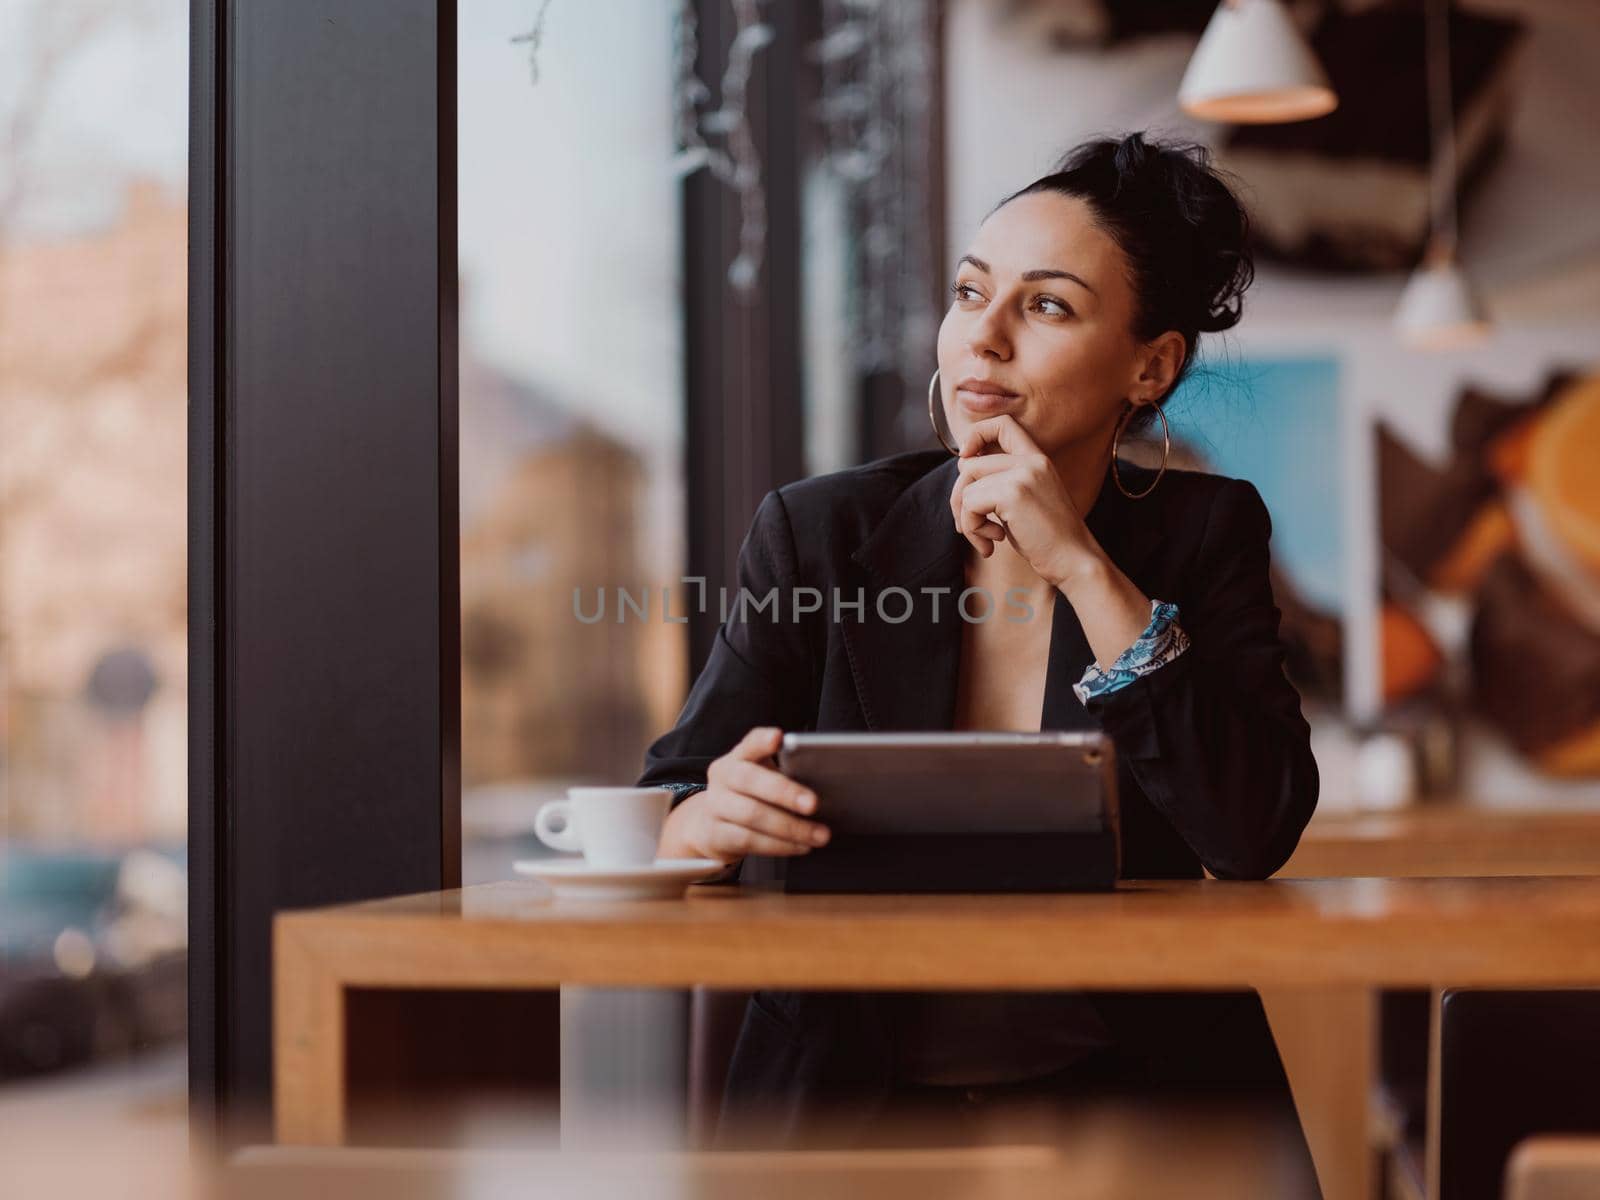 Latina woman sitting in cafe using tablet and drinks coffee on break from work